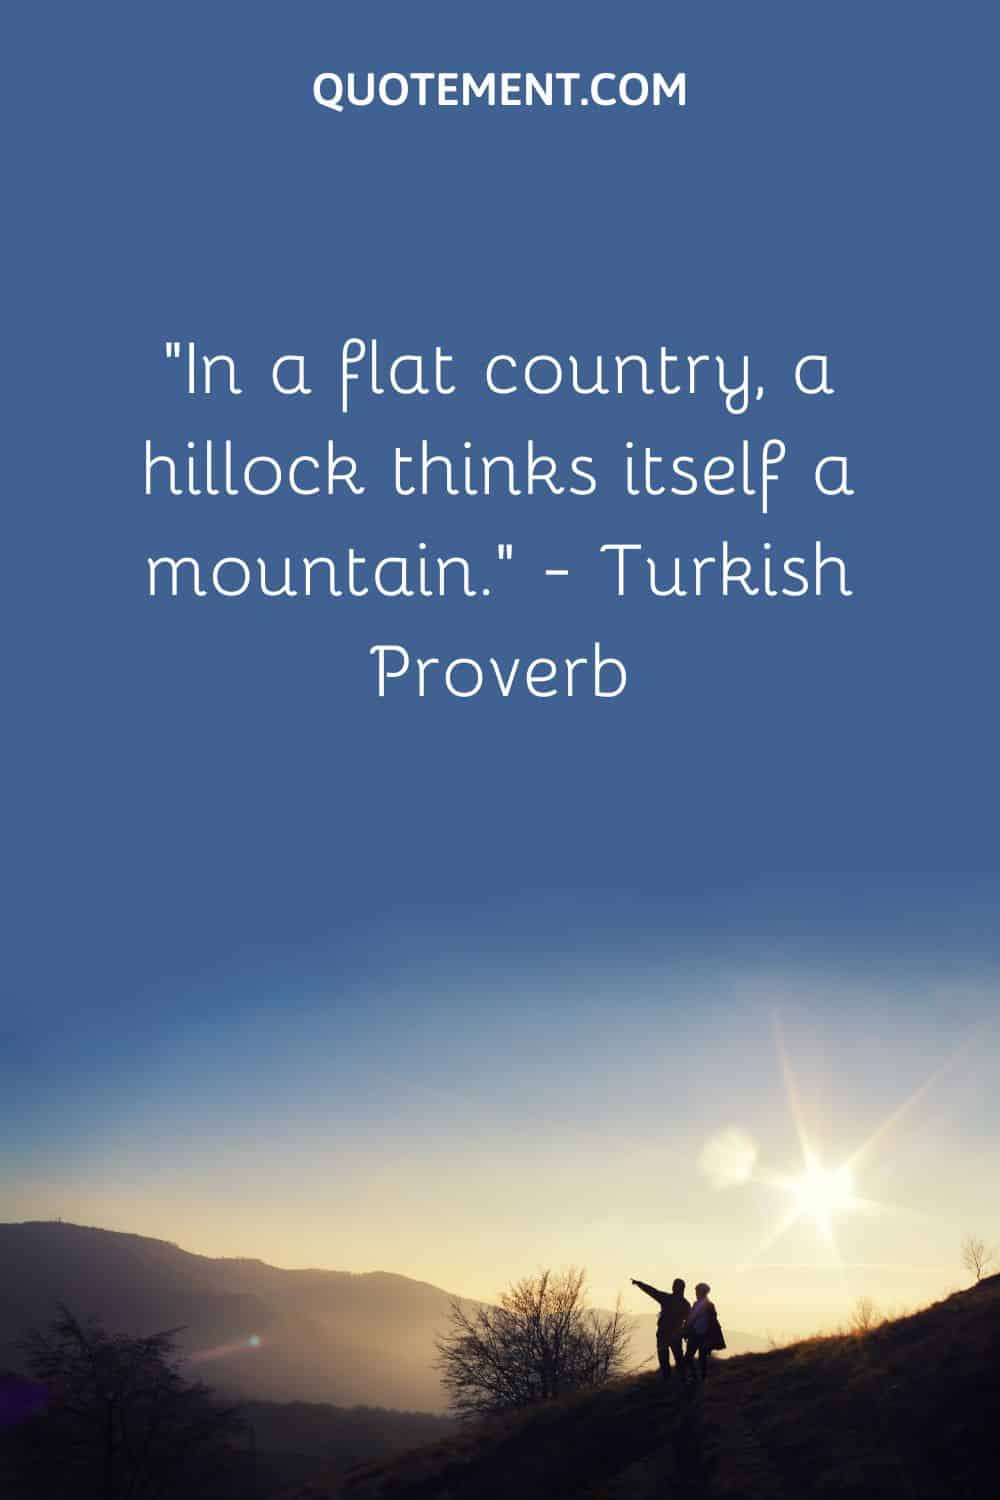 “In a flat country, a hillock thinks itself a mountain.” — Turkish Proverb